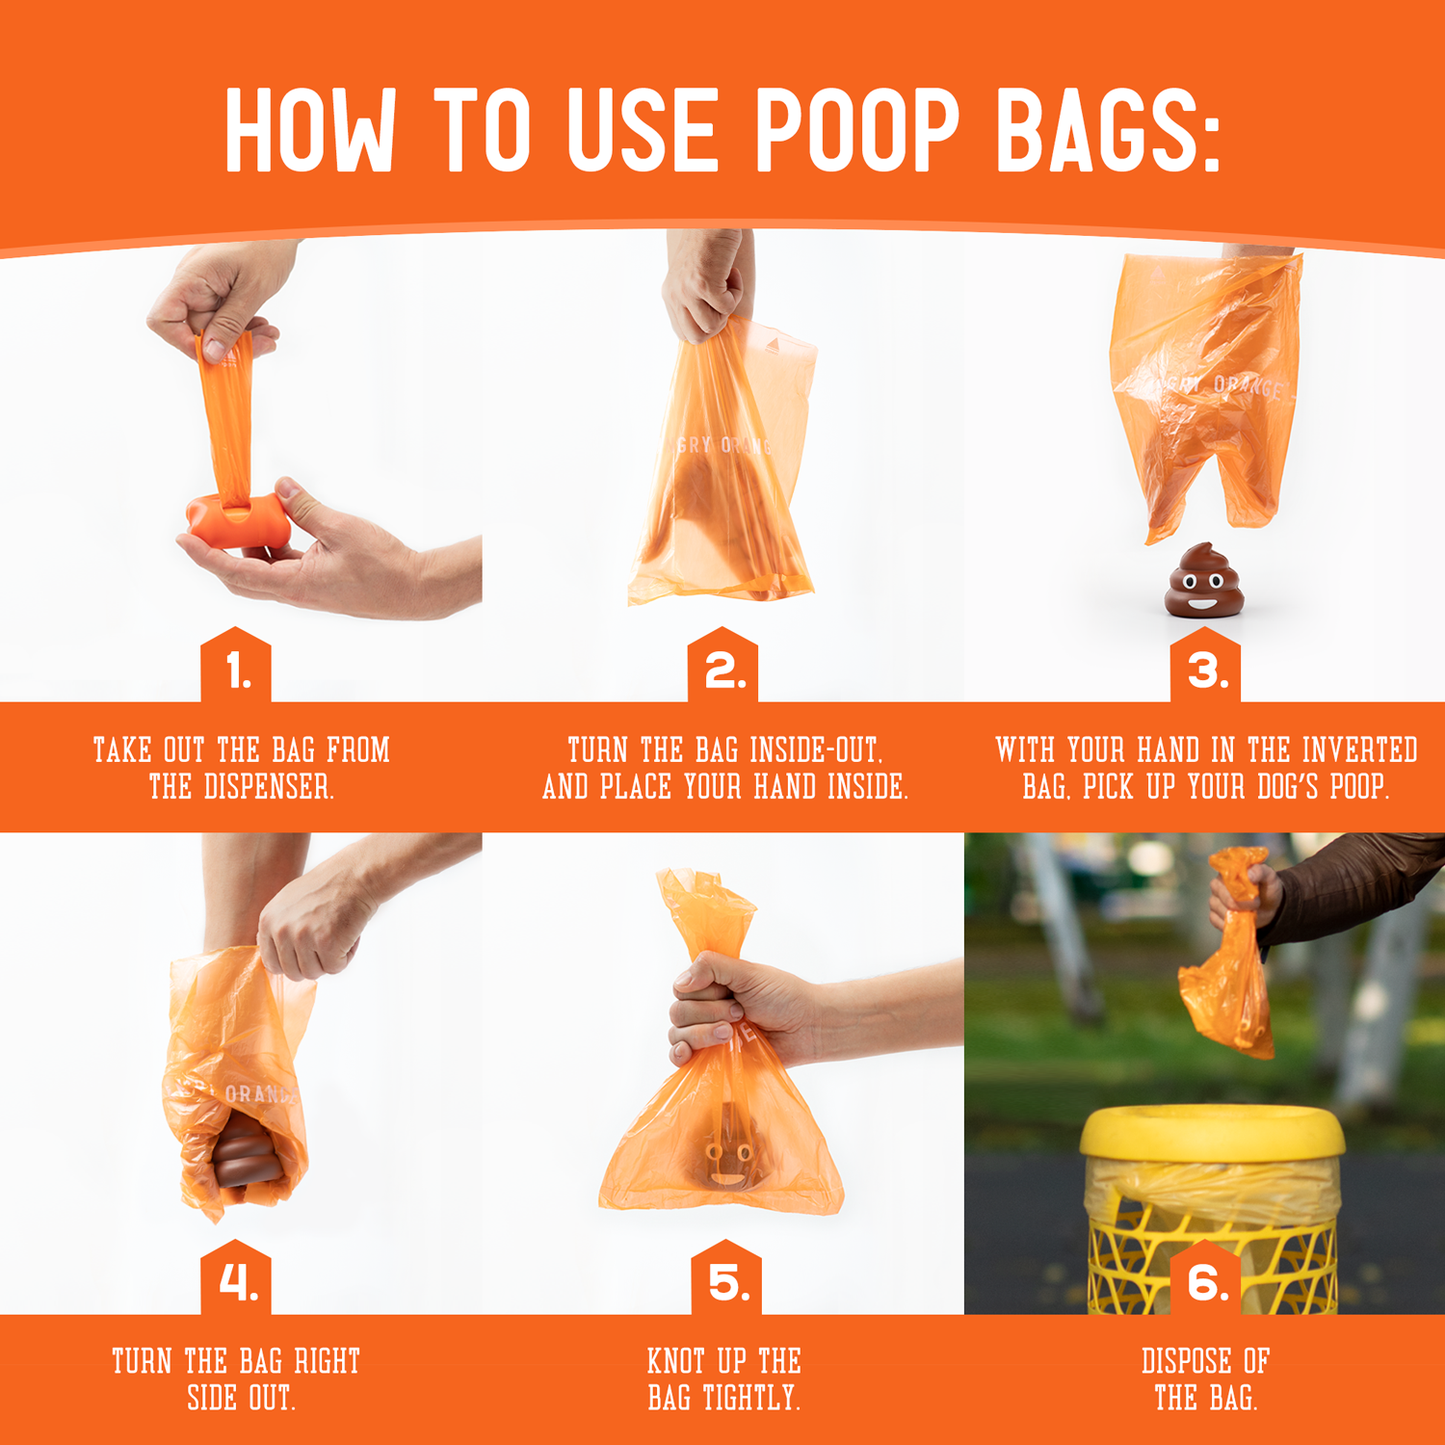 How to Use Poop Bags